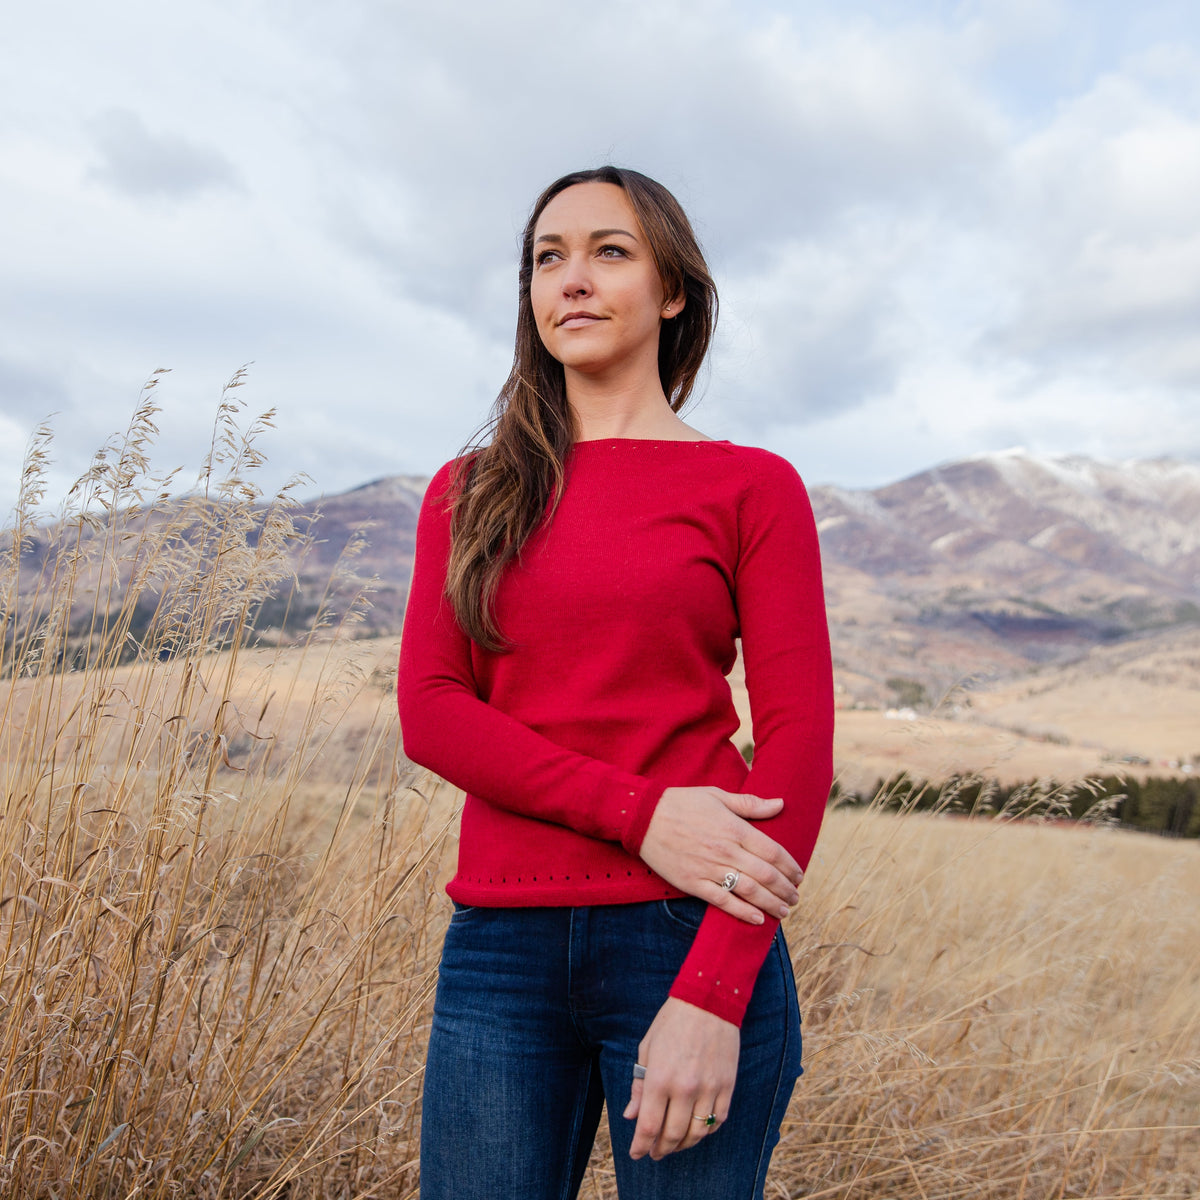 A woman with brown hair stands looking into the distance in a field of golden grass with mountains in the background. She is wearing blue jeans and the comfortable fashionable soft scarlet red Alpacas of Montana Luxe Light sweater for women.